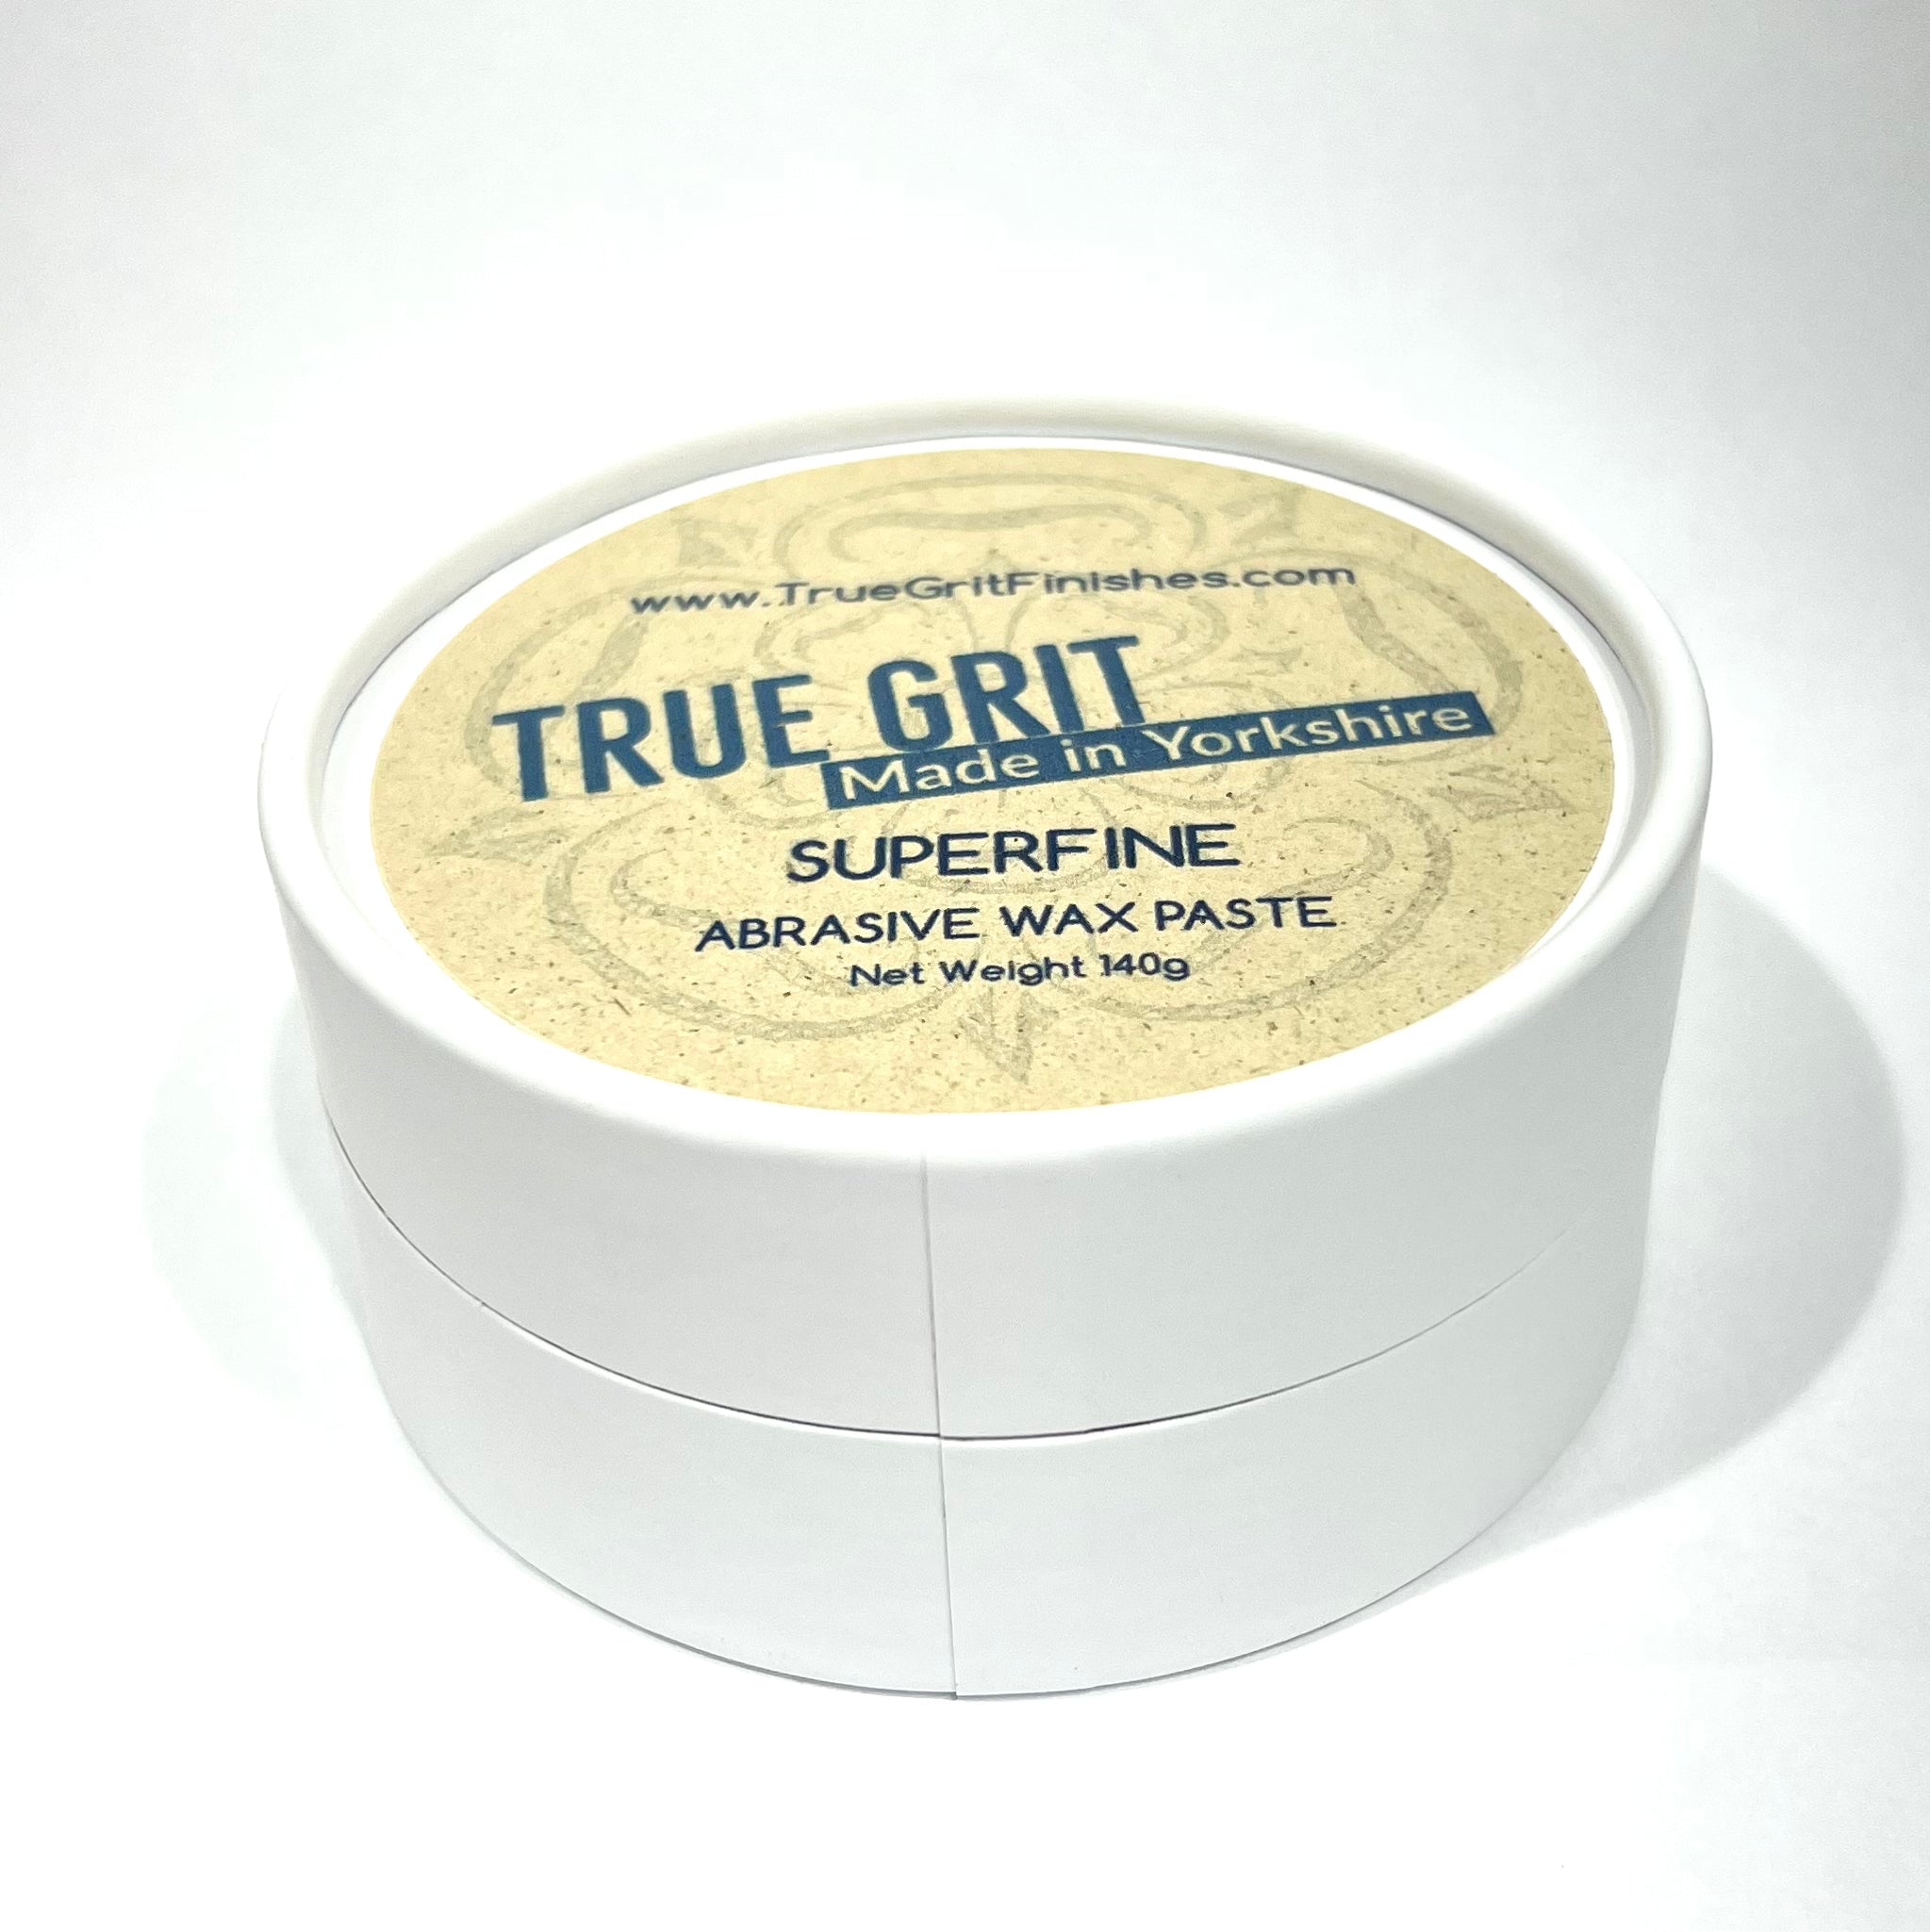 True Grit Superfine Abrasive Paste | Made in Yorkshire | For Resins and Lacquers